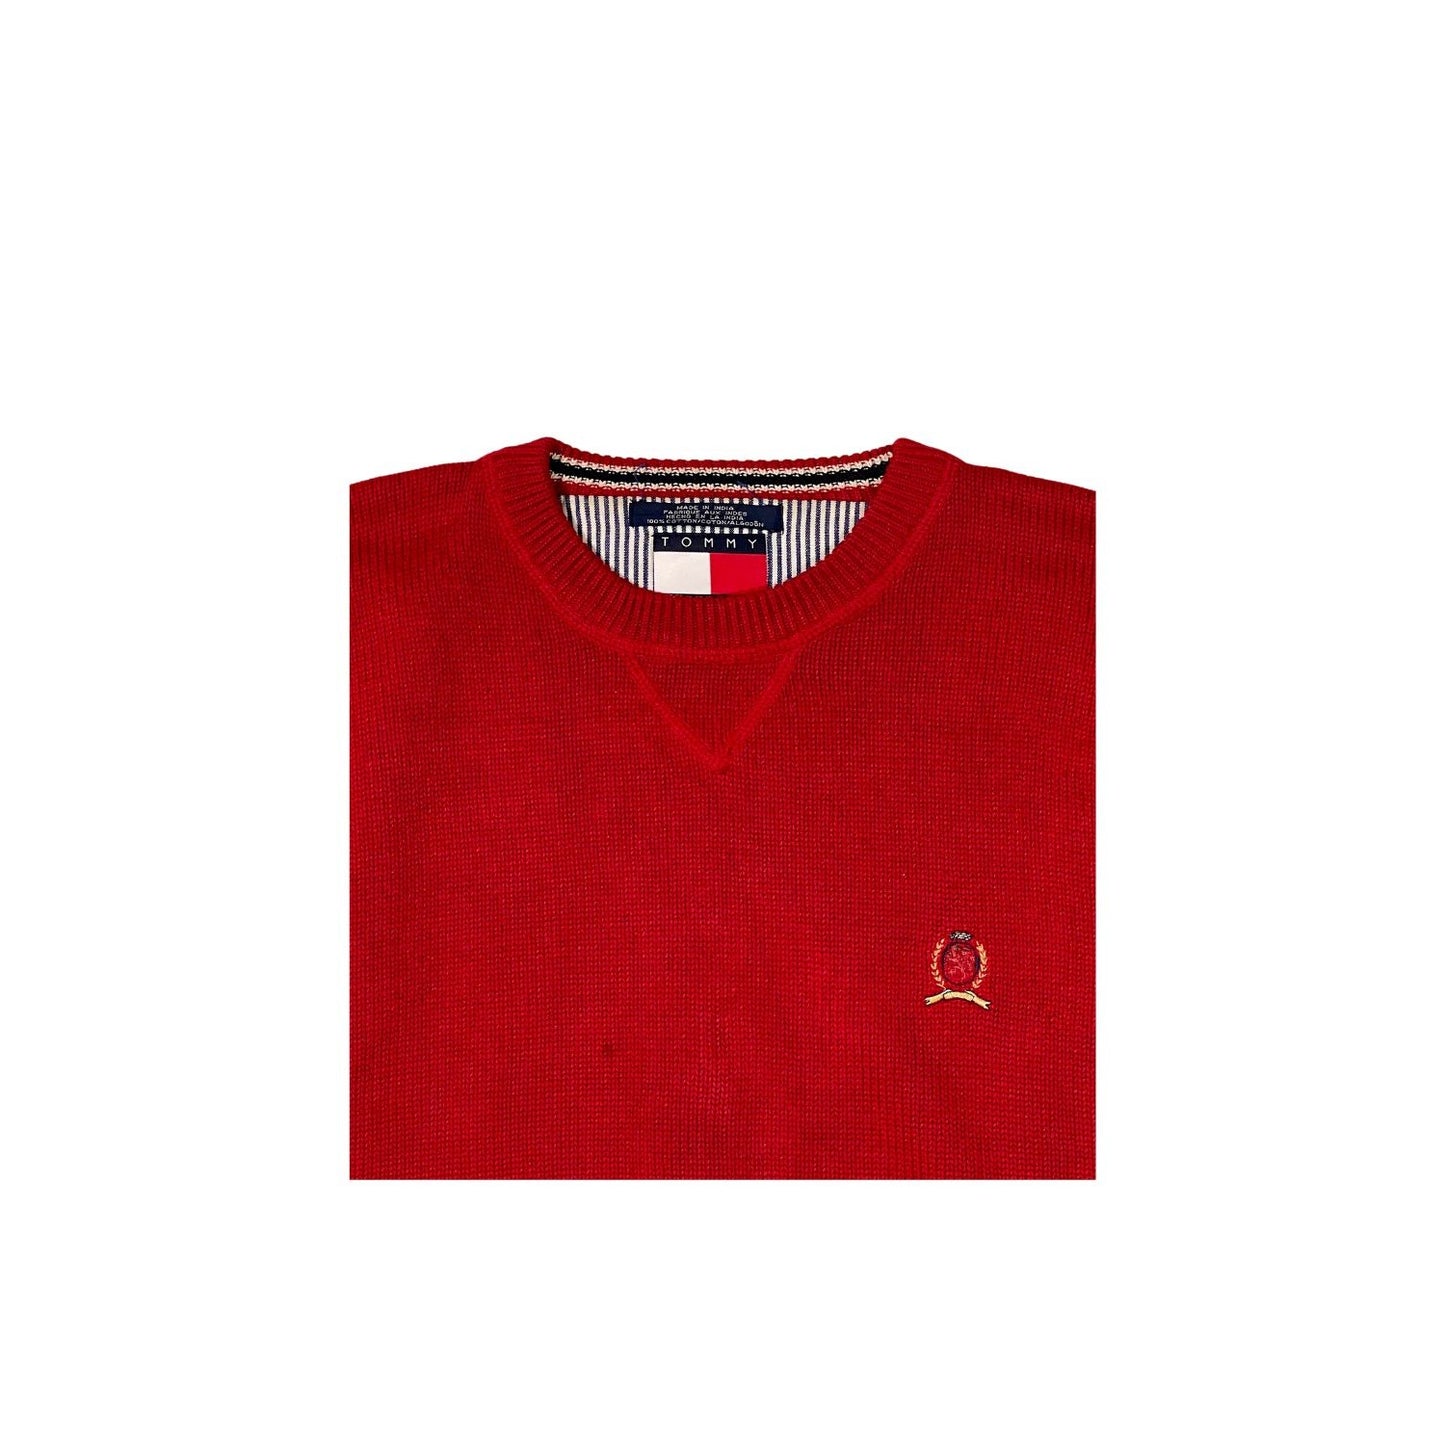 Tommy Hilfiger Red Sweater - Heritage Fashion